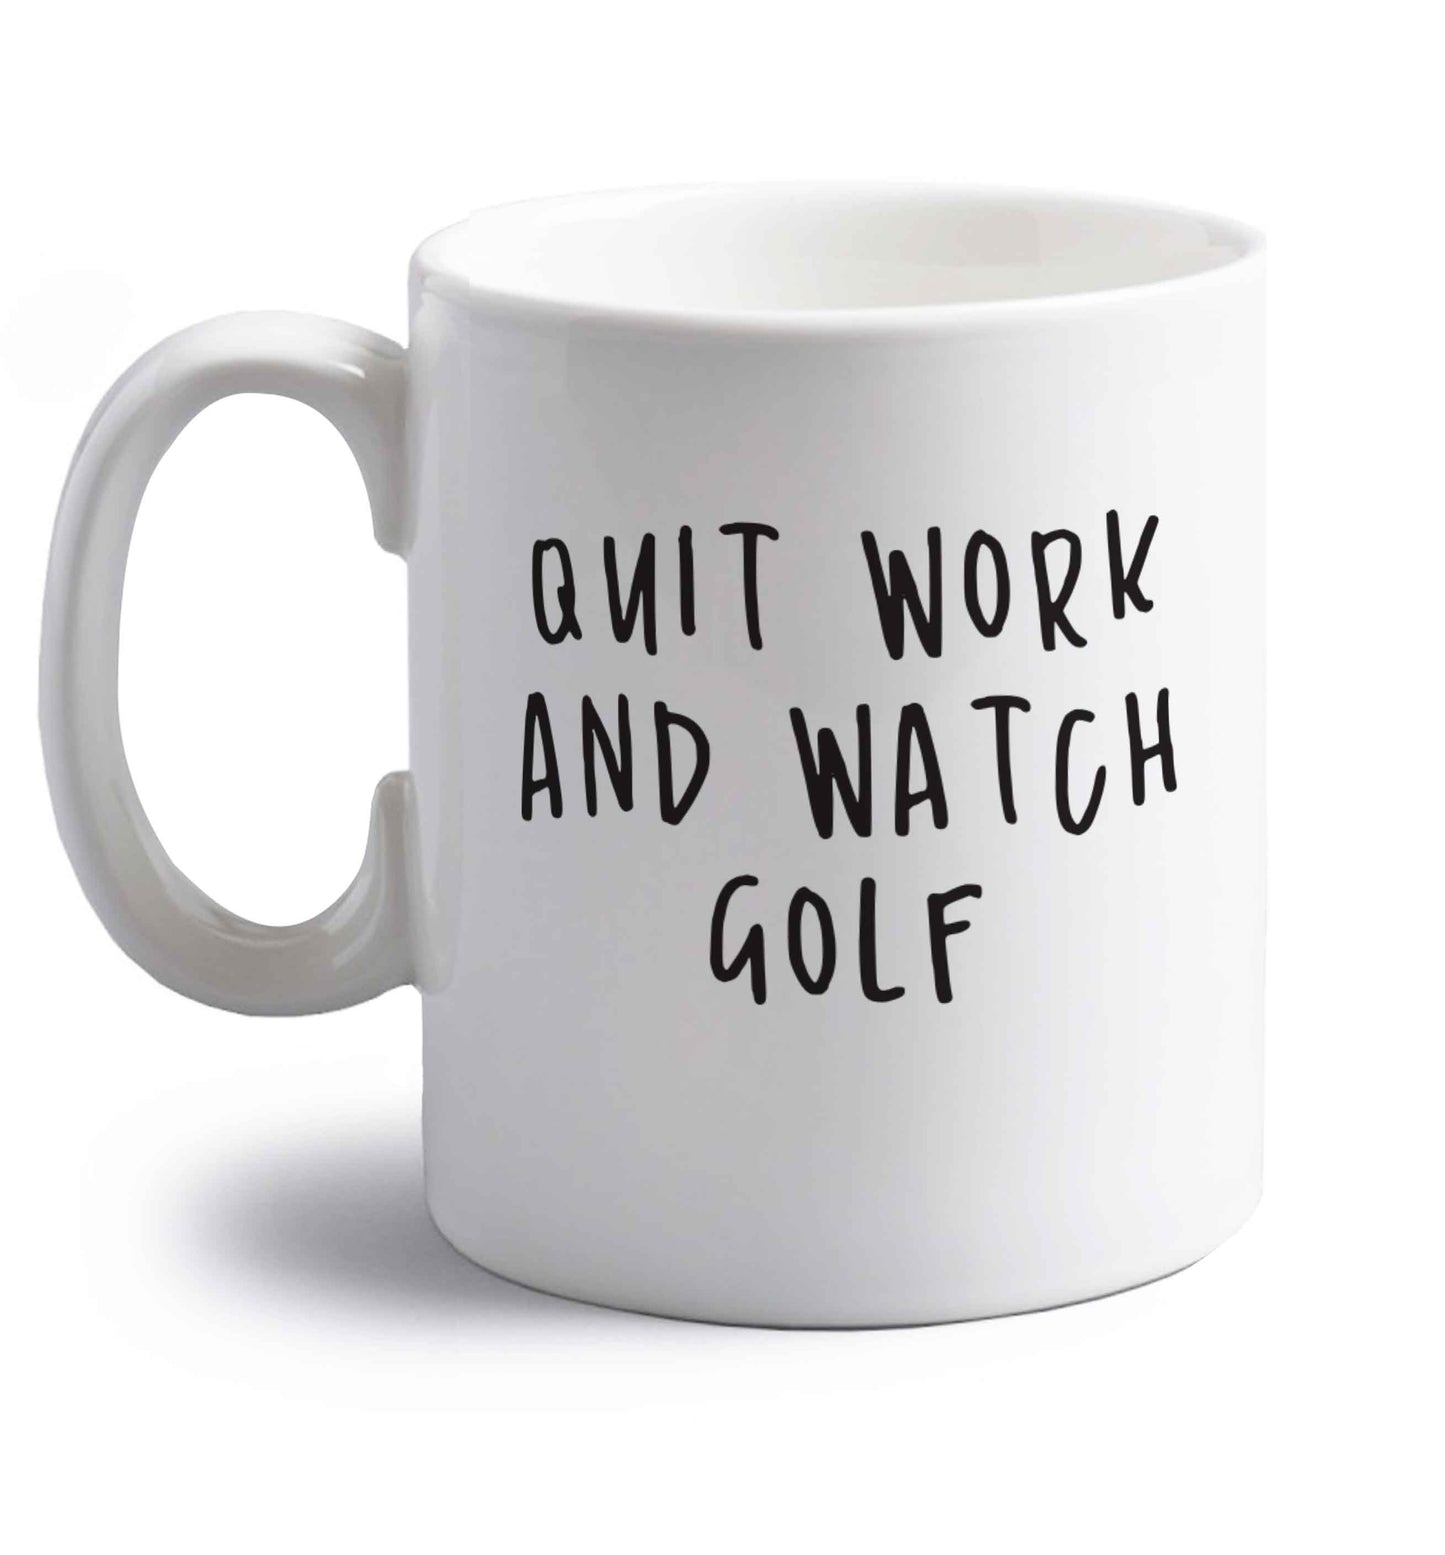 Quit work and watch golf right handed white ceramic mug 